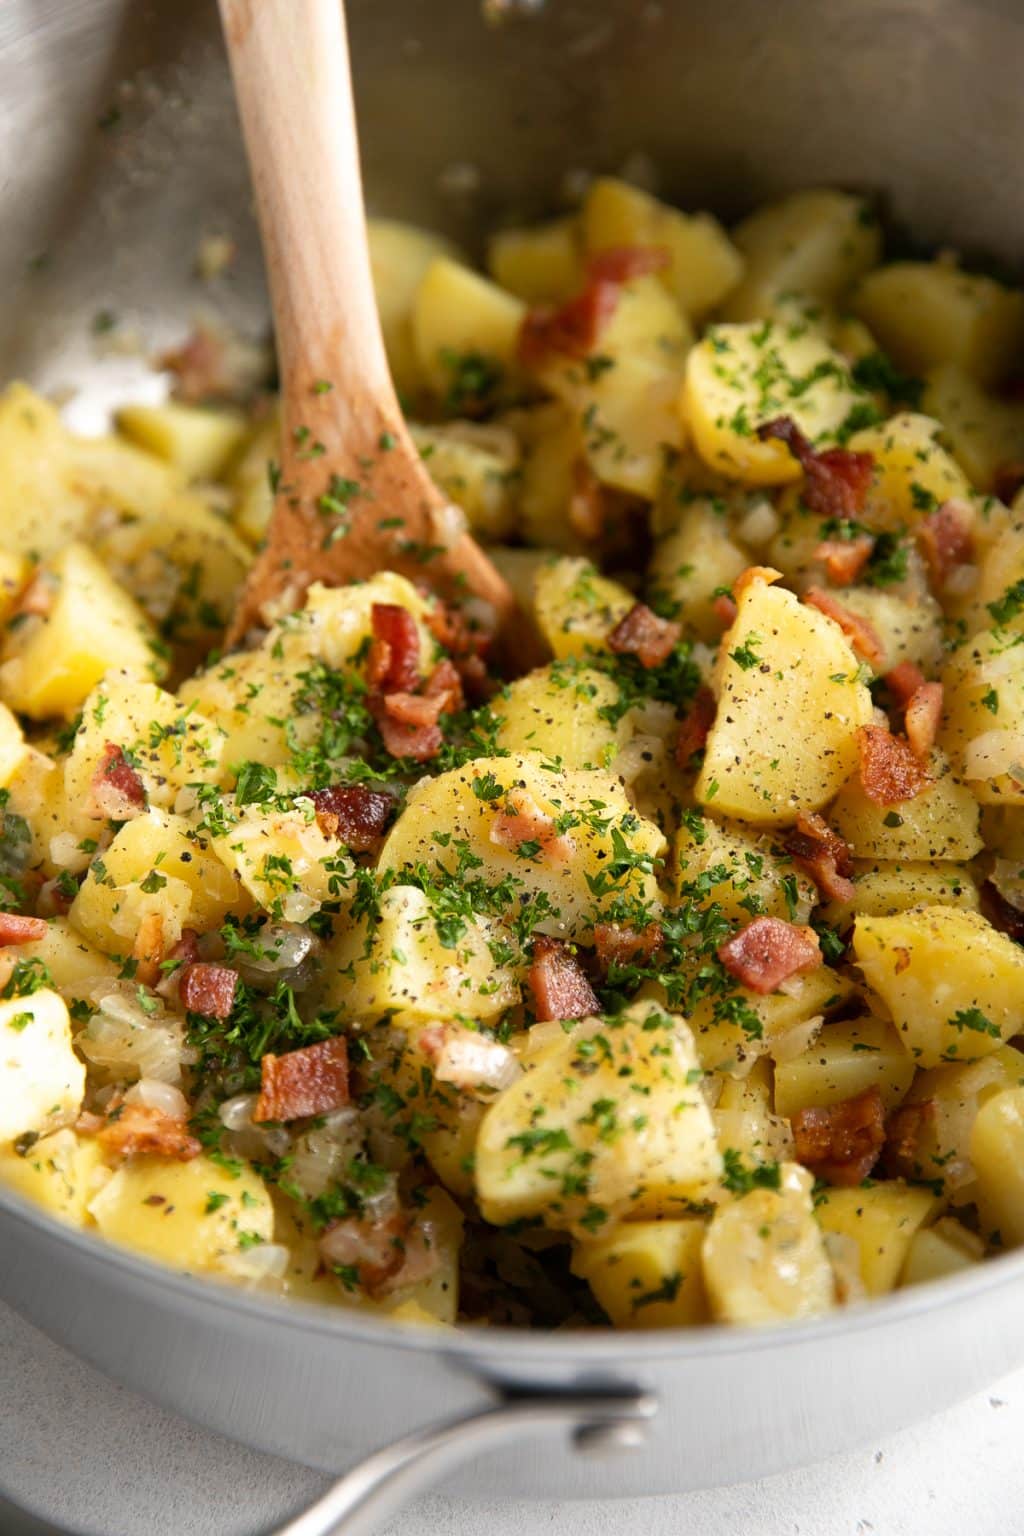 German Potato Salad - The Forked Spoon